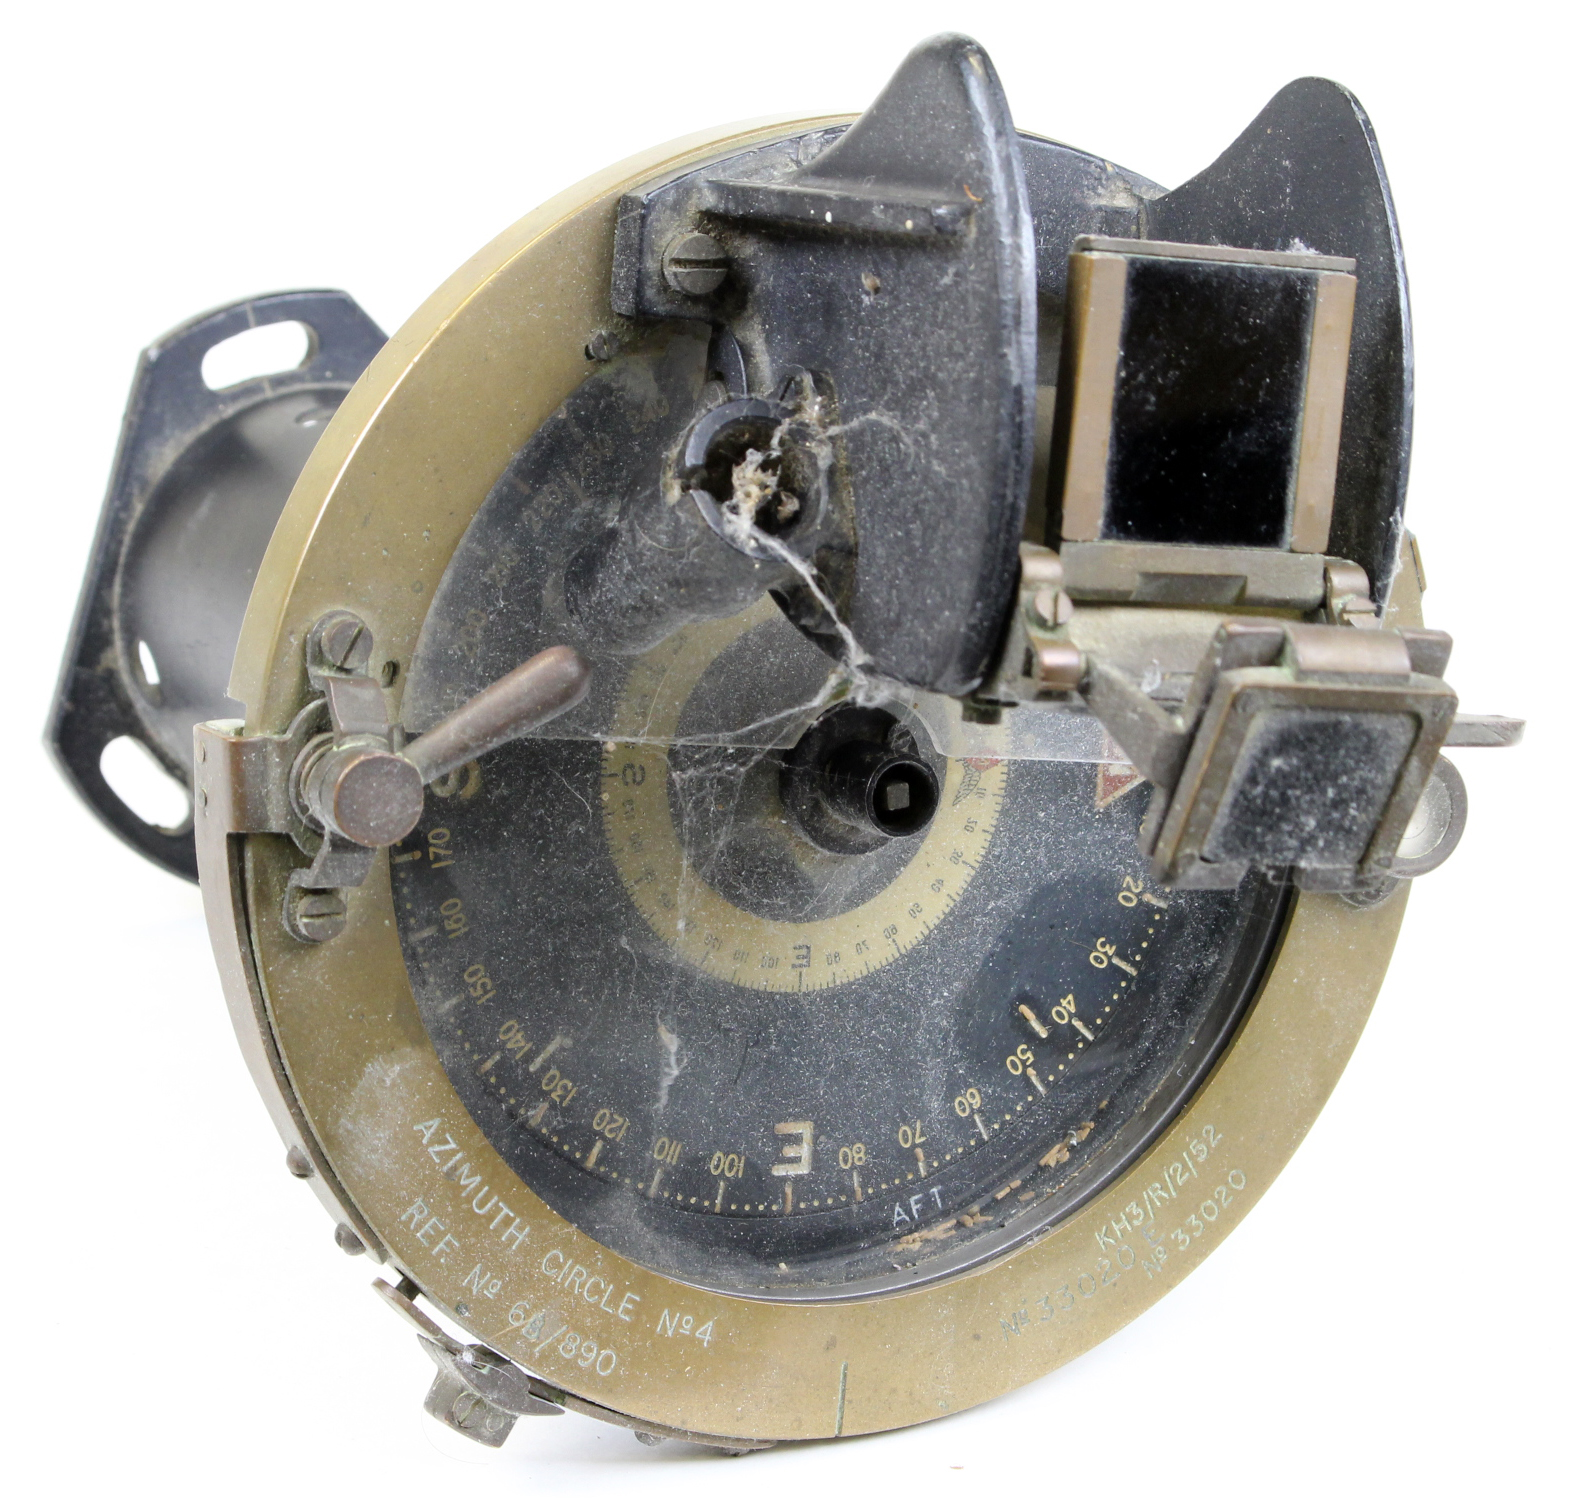 Compass and mount with magnification attachment. Marked Azimuth Circle Nr 4 Ref 6B/890 Issue